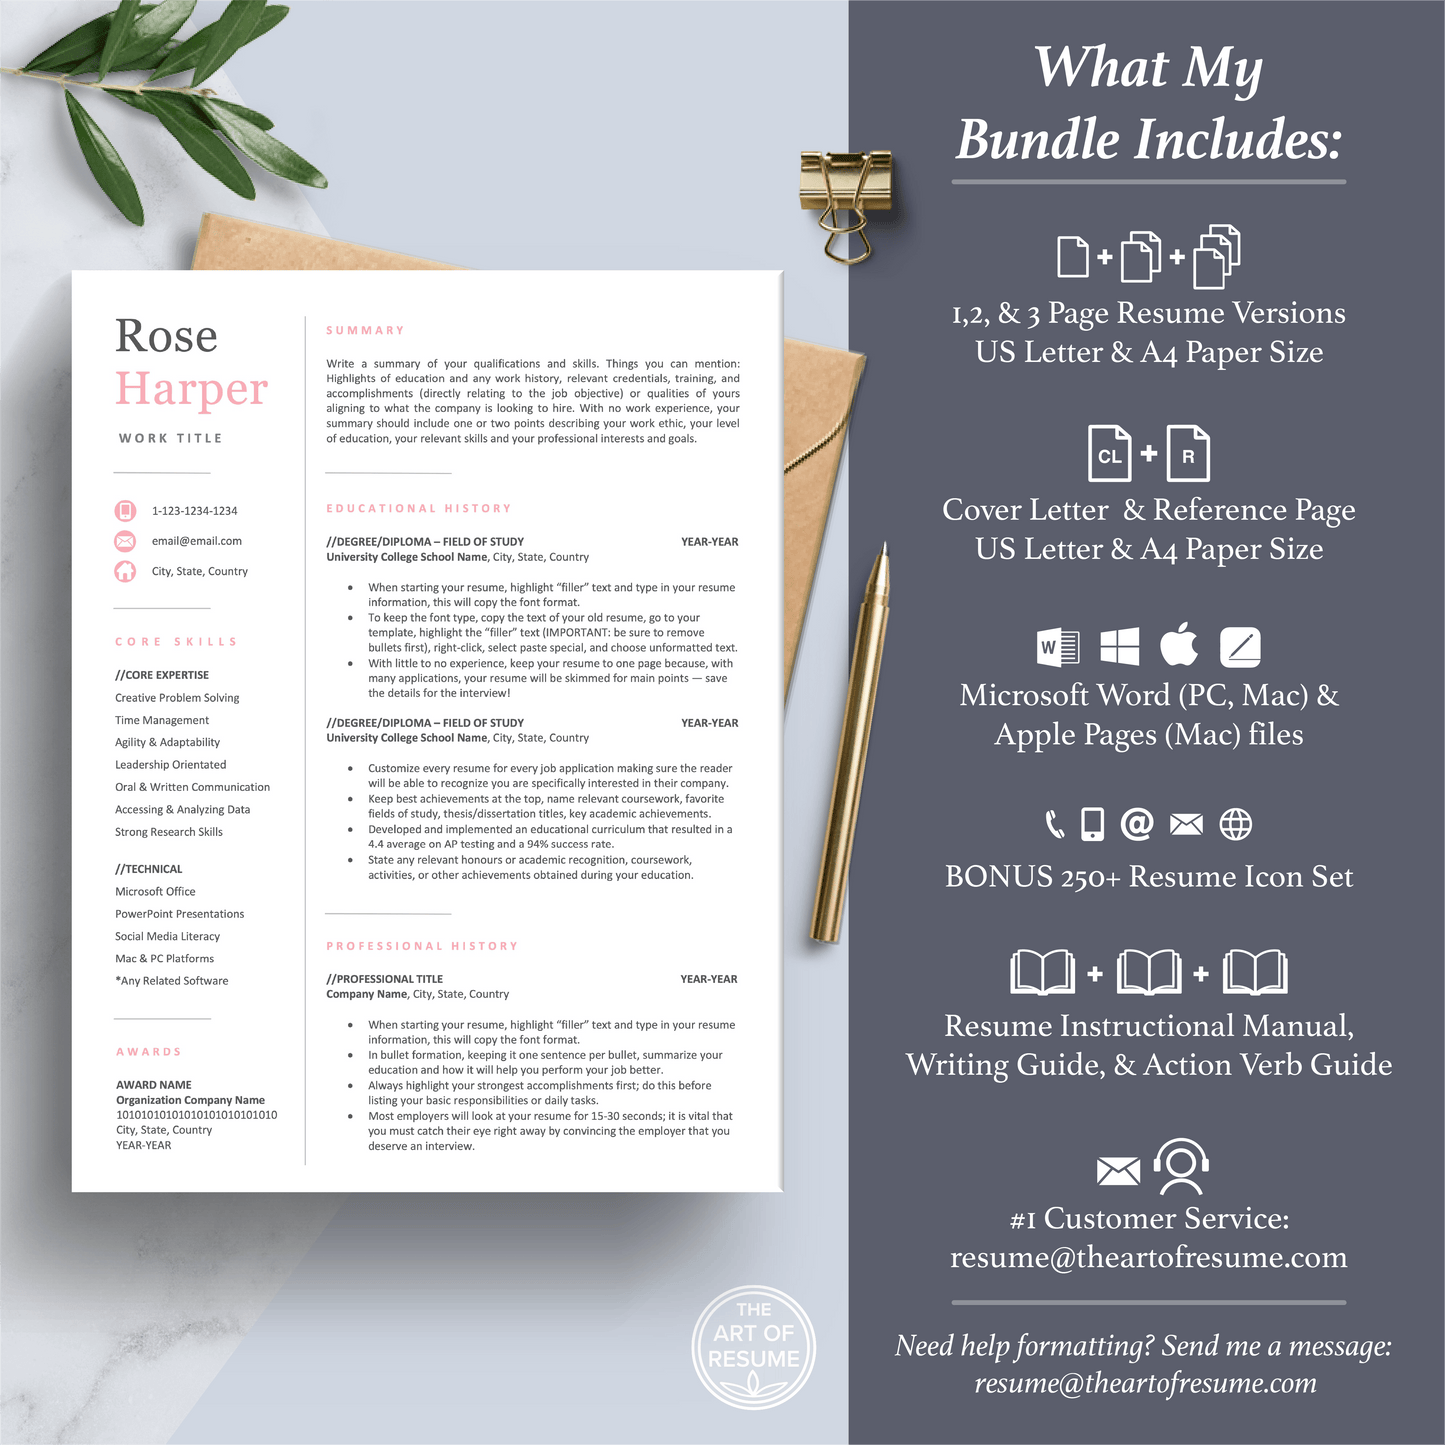 The Art of Resume Templates | Student Graduate  Resume CV Template Maker 3, Cover Letter, Reference Page, Mac, PC, A4 Paper, US size, Free Guide, The Art of Resume Writing, 250 Bonus Resume Icons